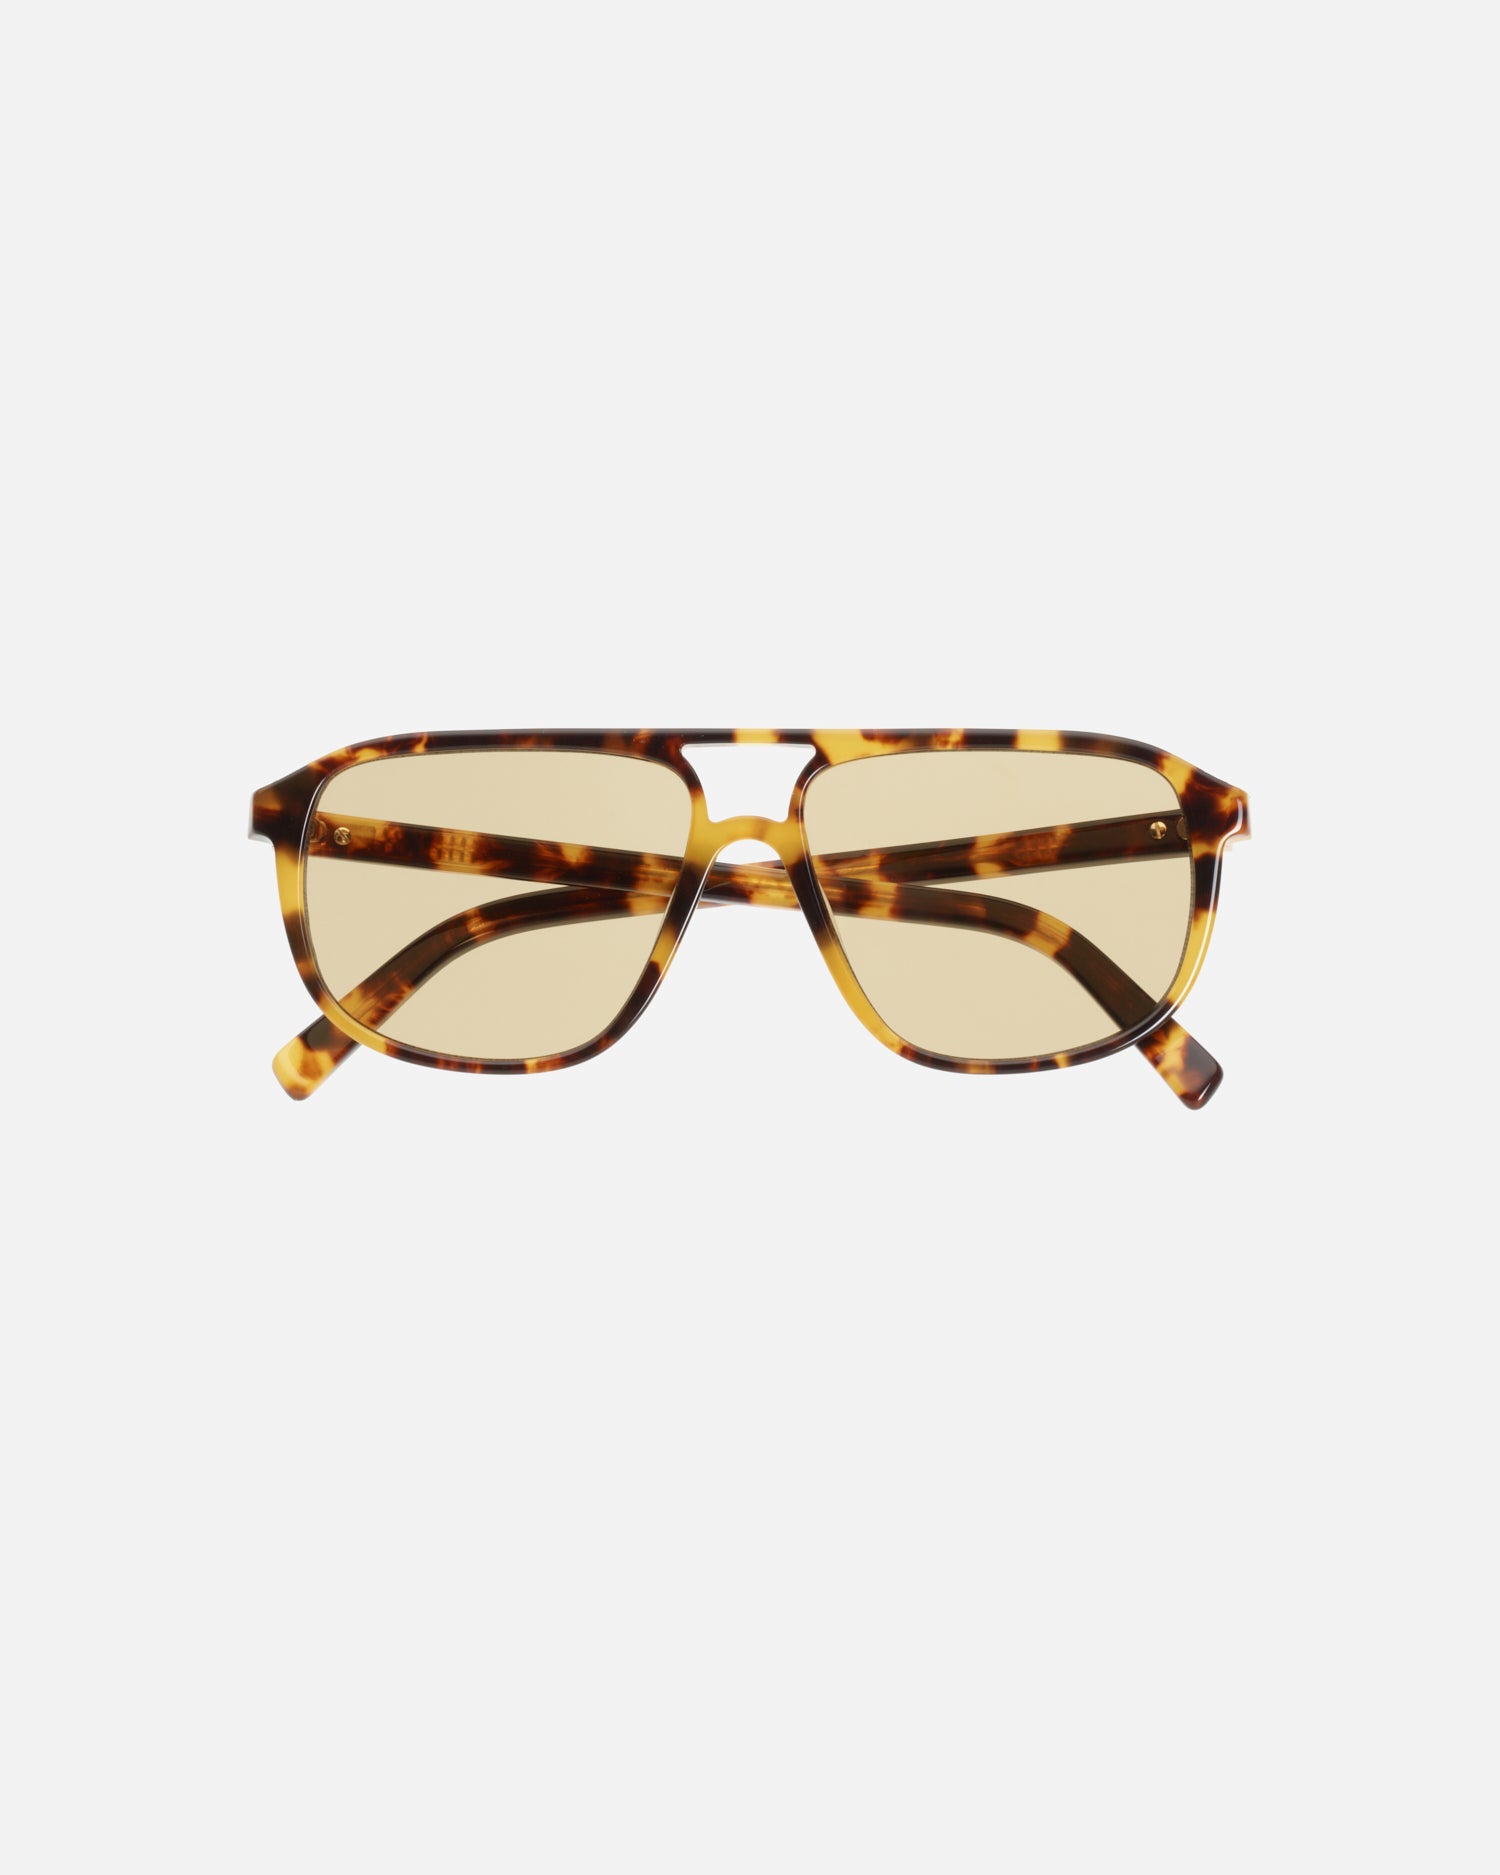 La Touriste luxe sunglasses by Velvet Canyon in Eco Tort